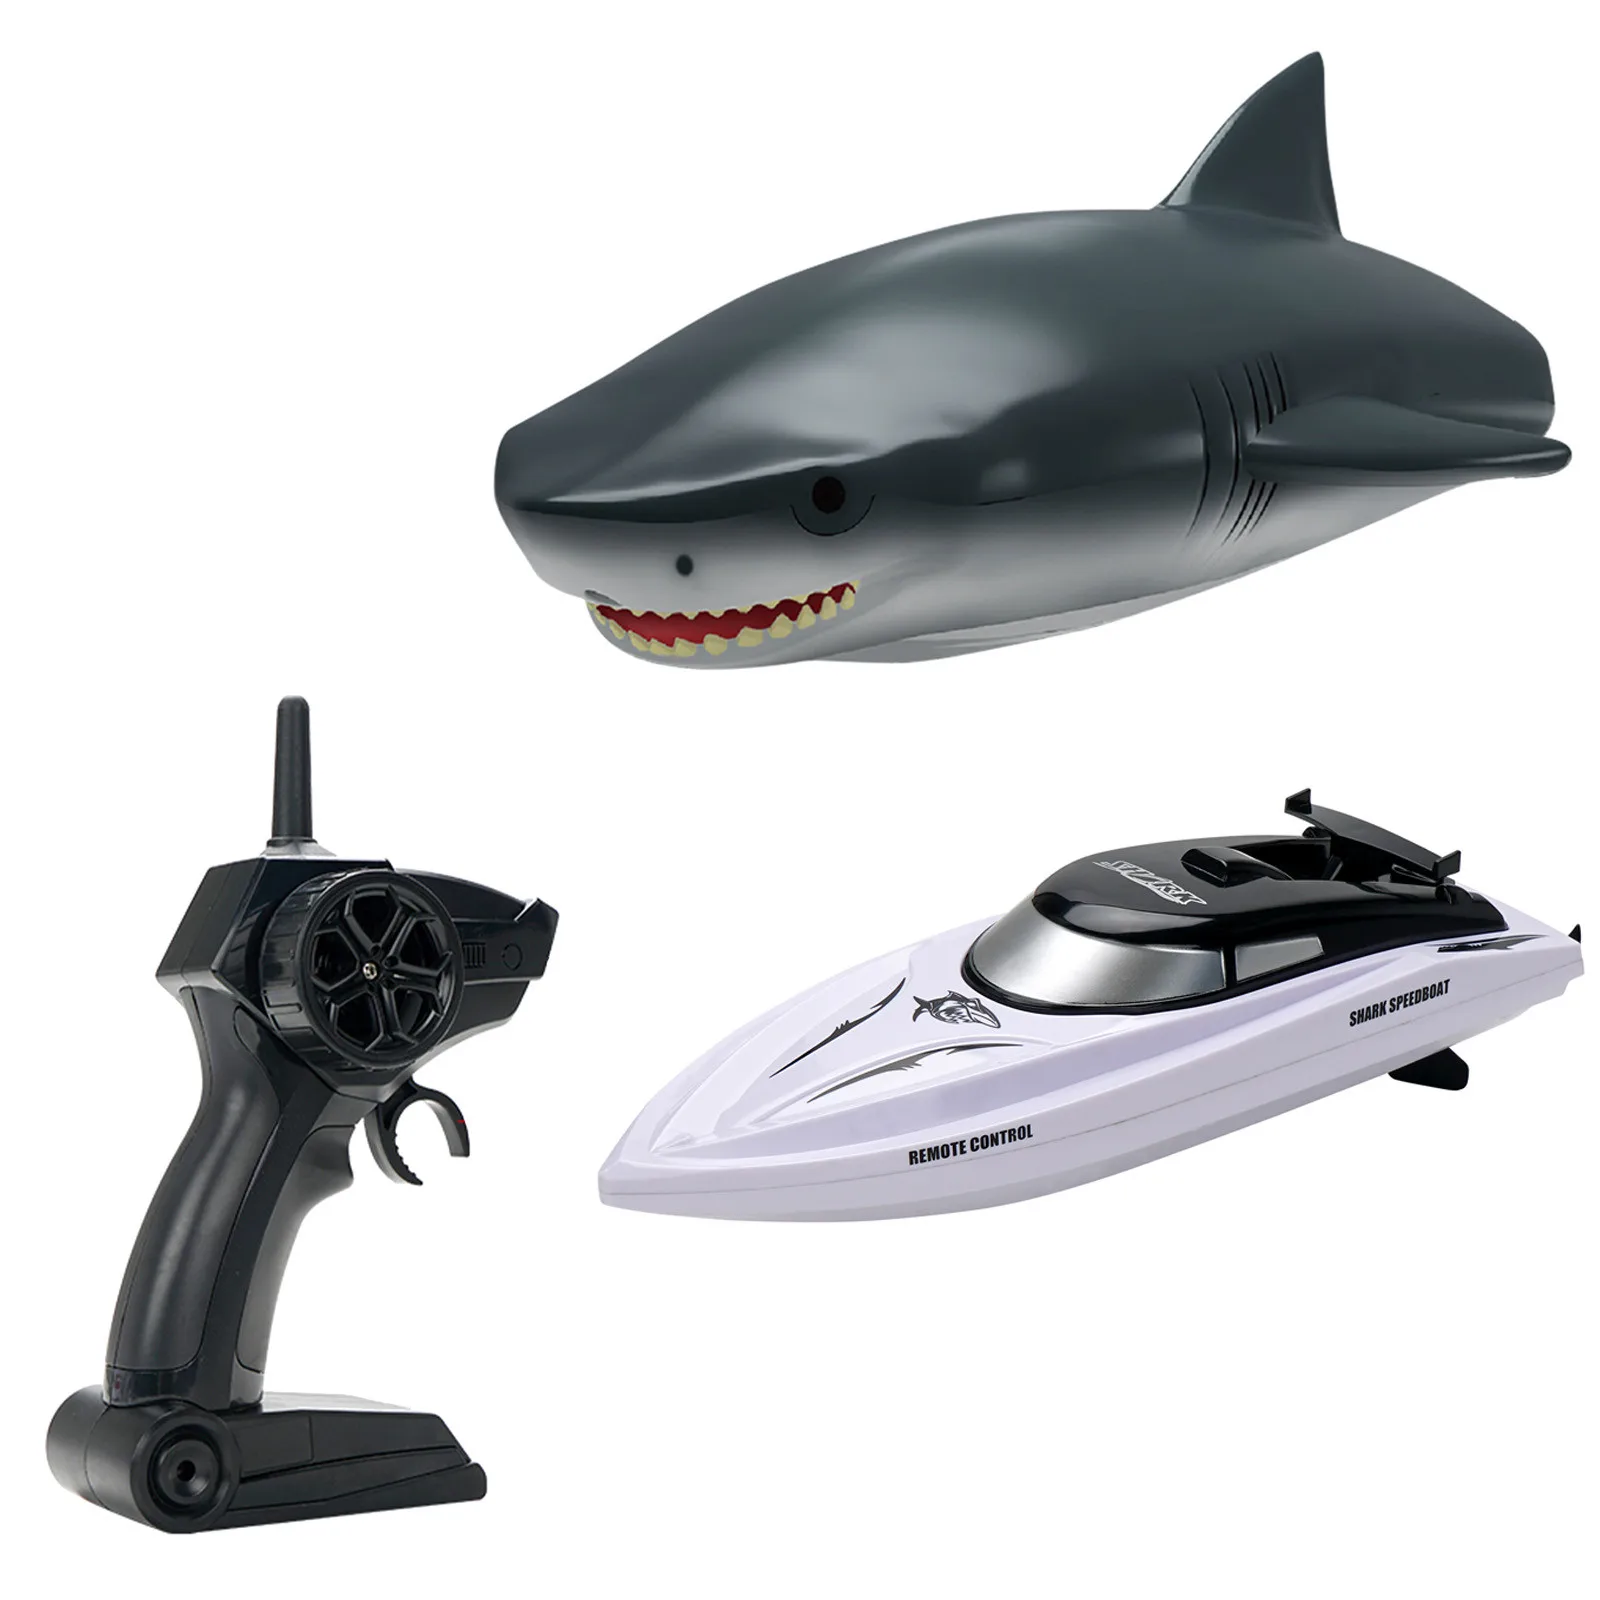 2.4G 4 Channel Remote Control Boats for Pools and Lakes for Kids and Adults Newest Simulation Remote Control Shark Boat with Dual Motor Swim in Water RC Boat XFUNY 